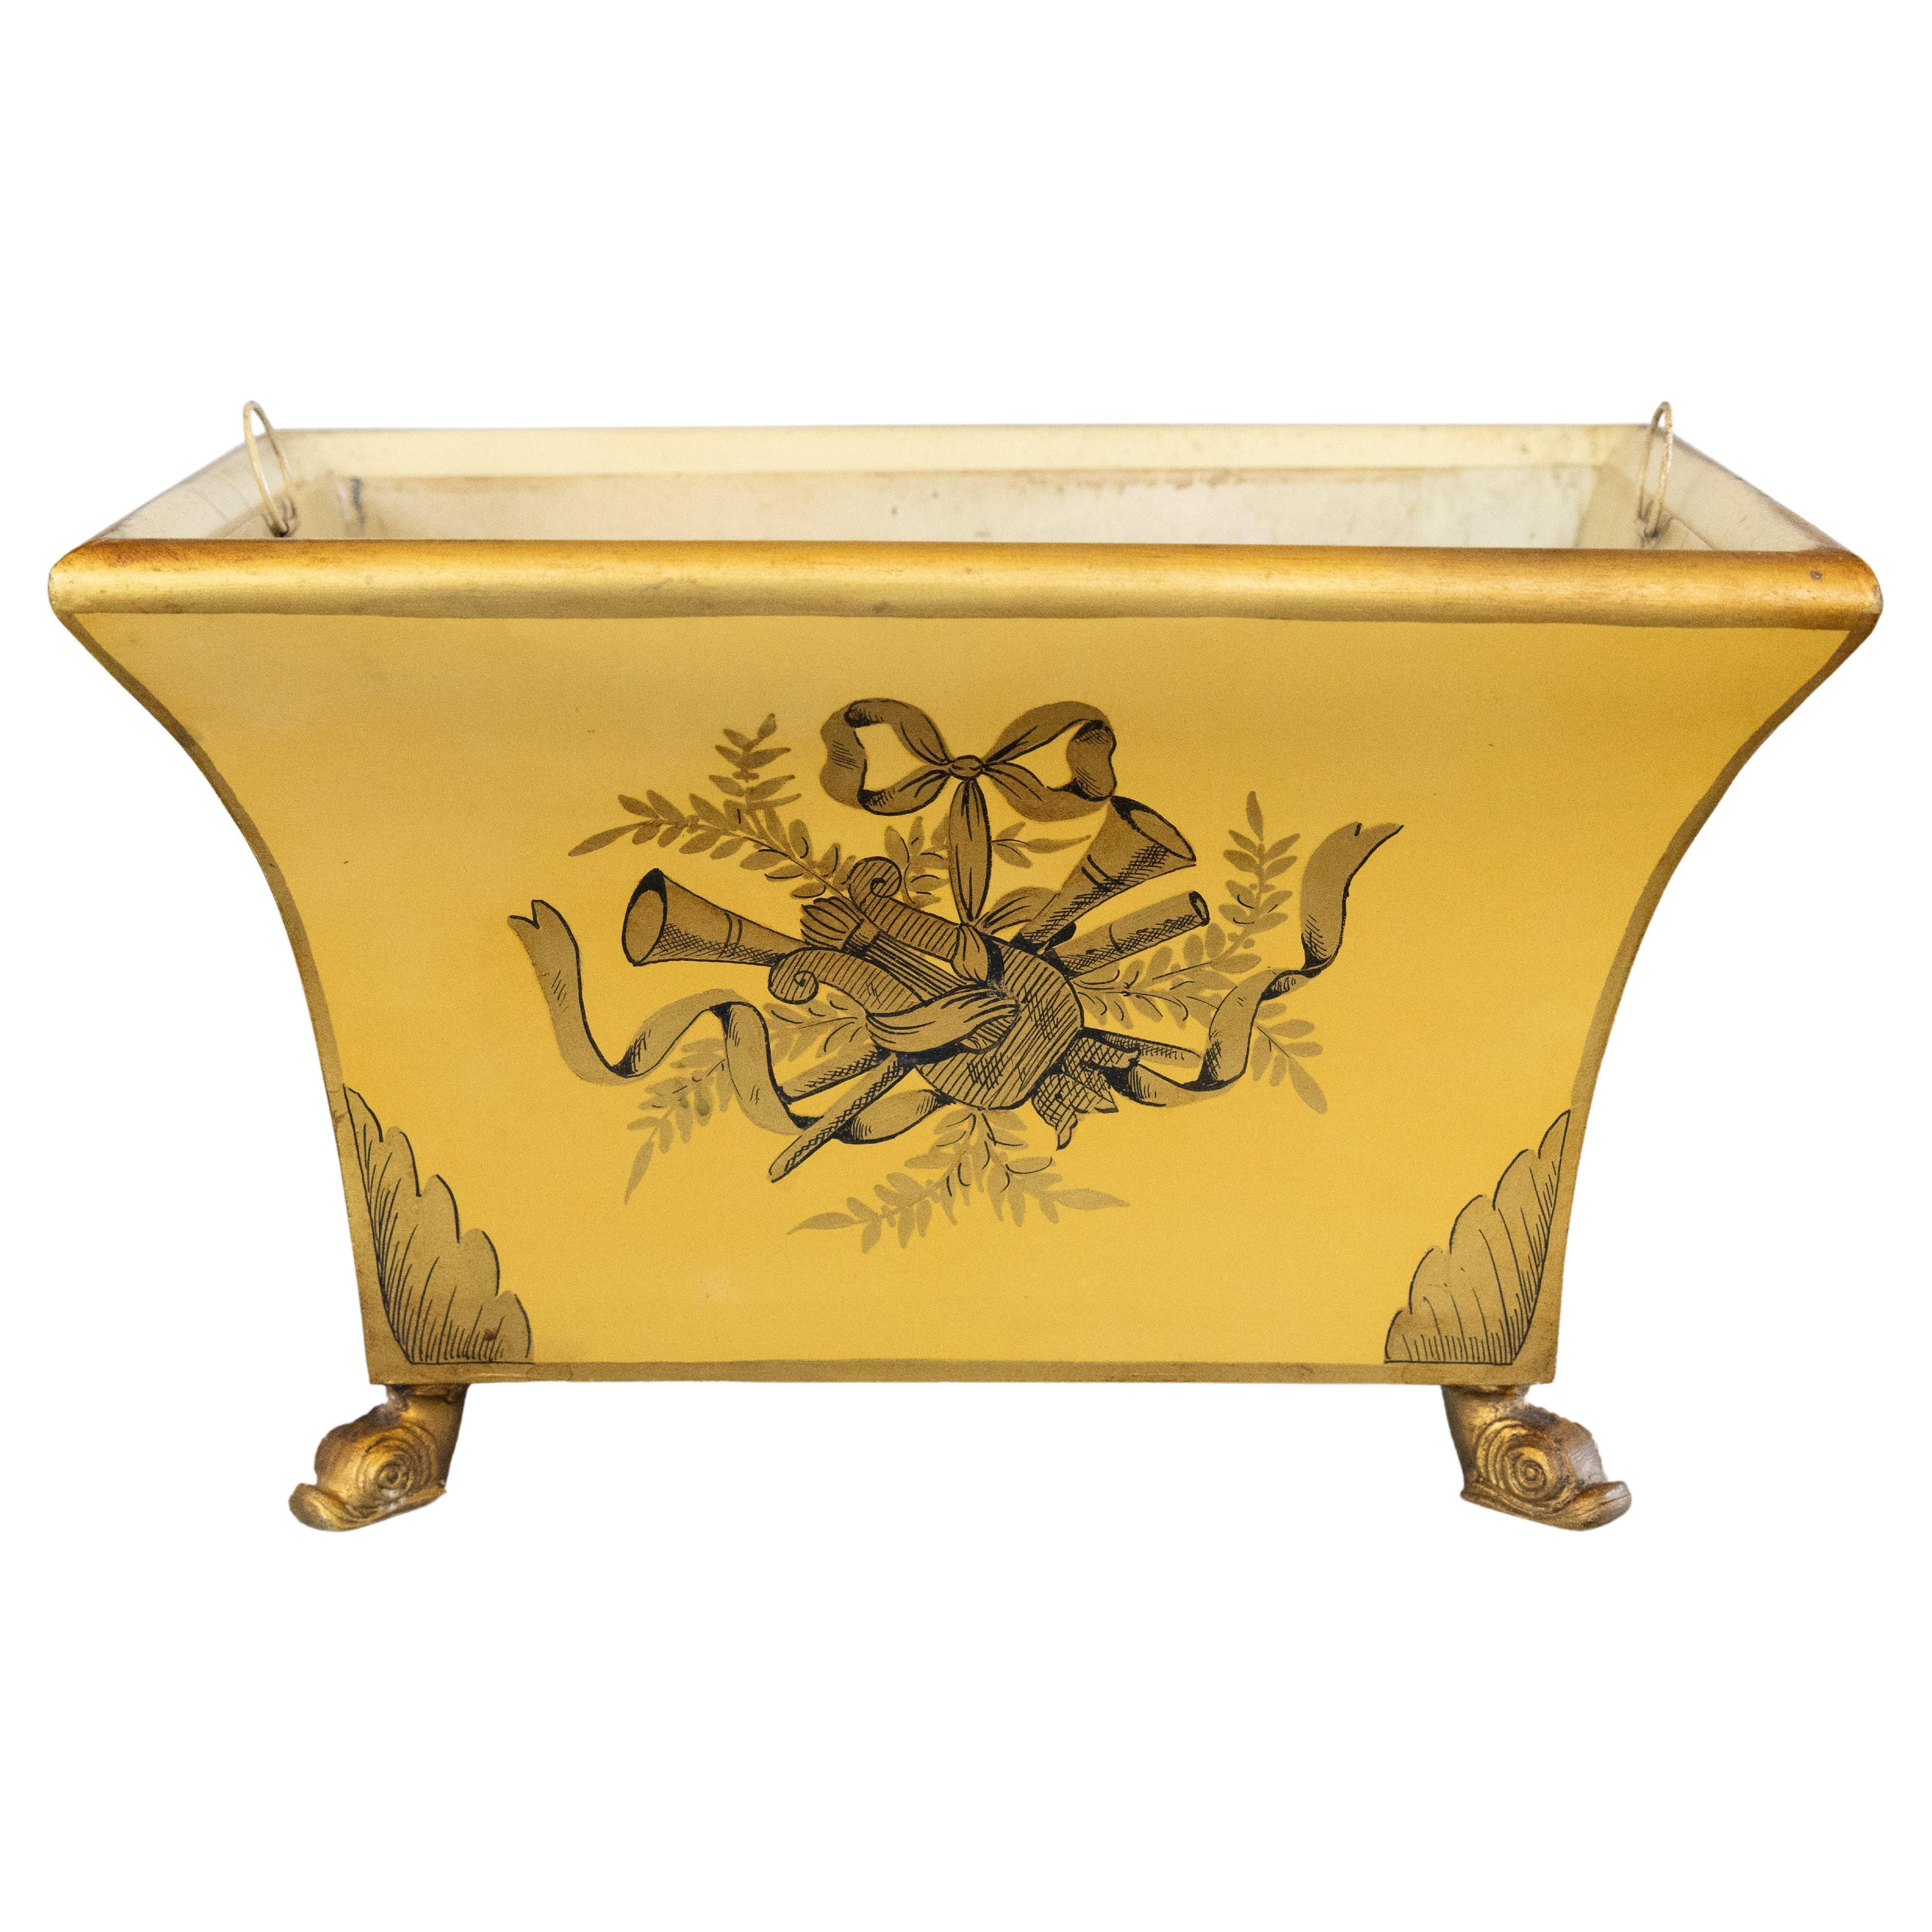 Early 20th Century French Mustard Yellow Tole Footed Jardiniere Cachepot For Sale